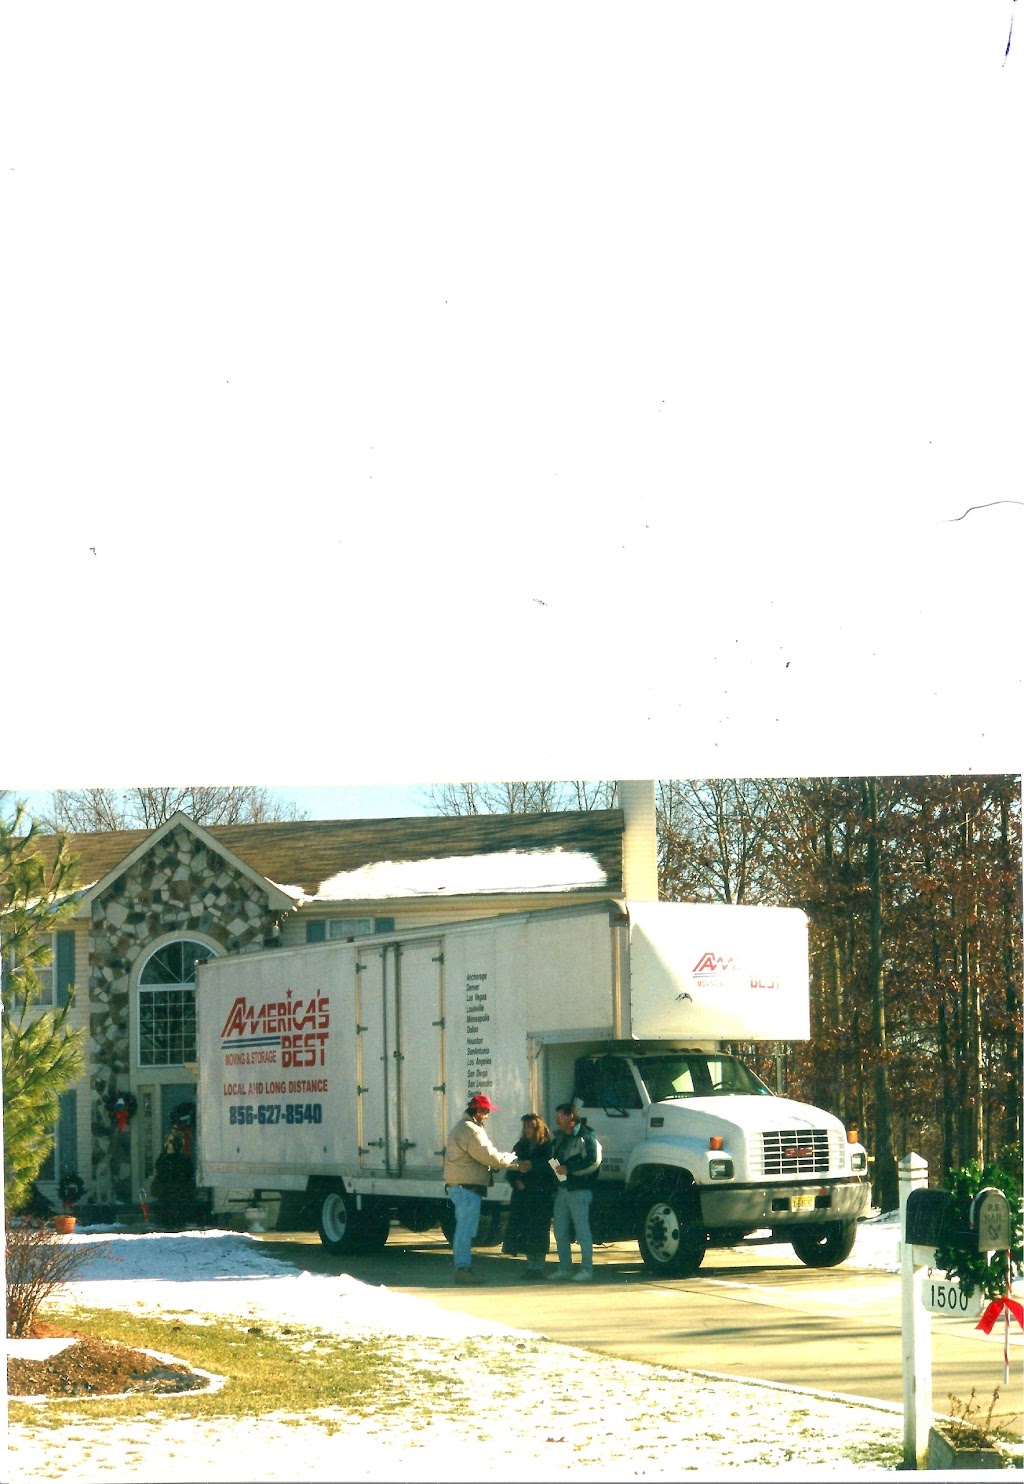 A1 America’s Best Moving | 701 Sycamore Ct, Laurel Springs, NJ 08021 | Phone: (856) 627-8540